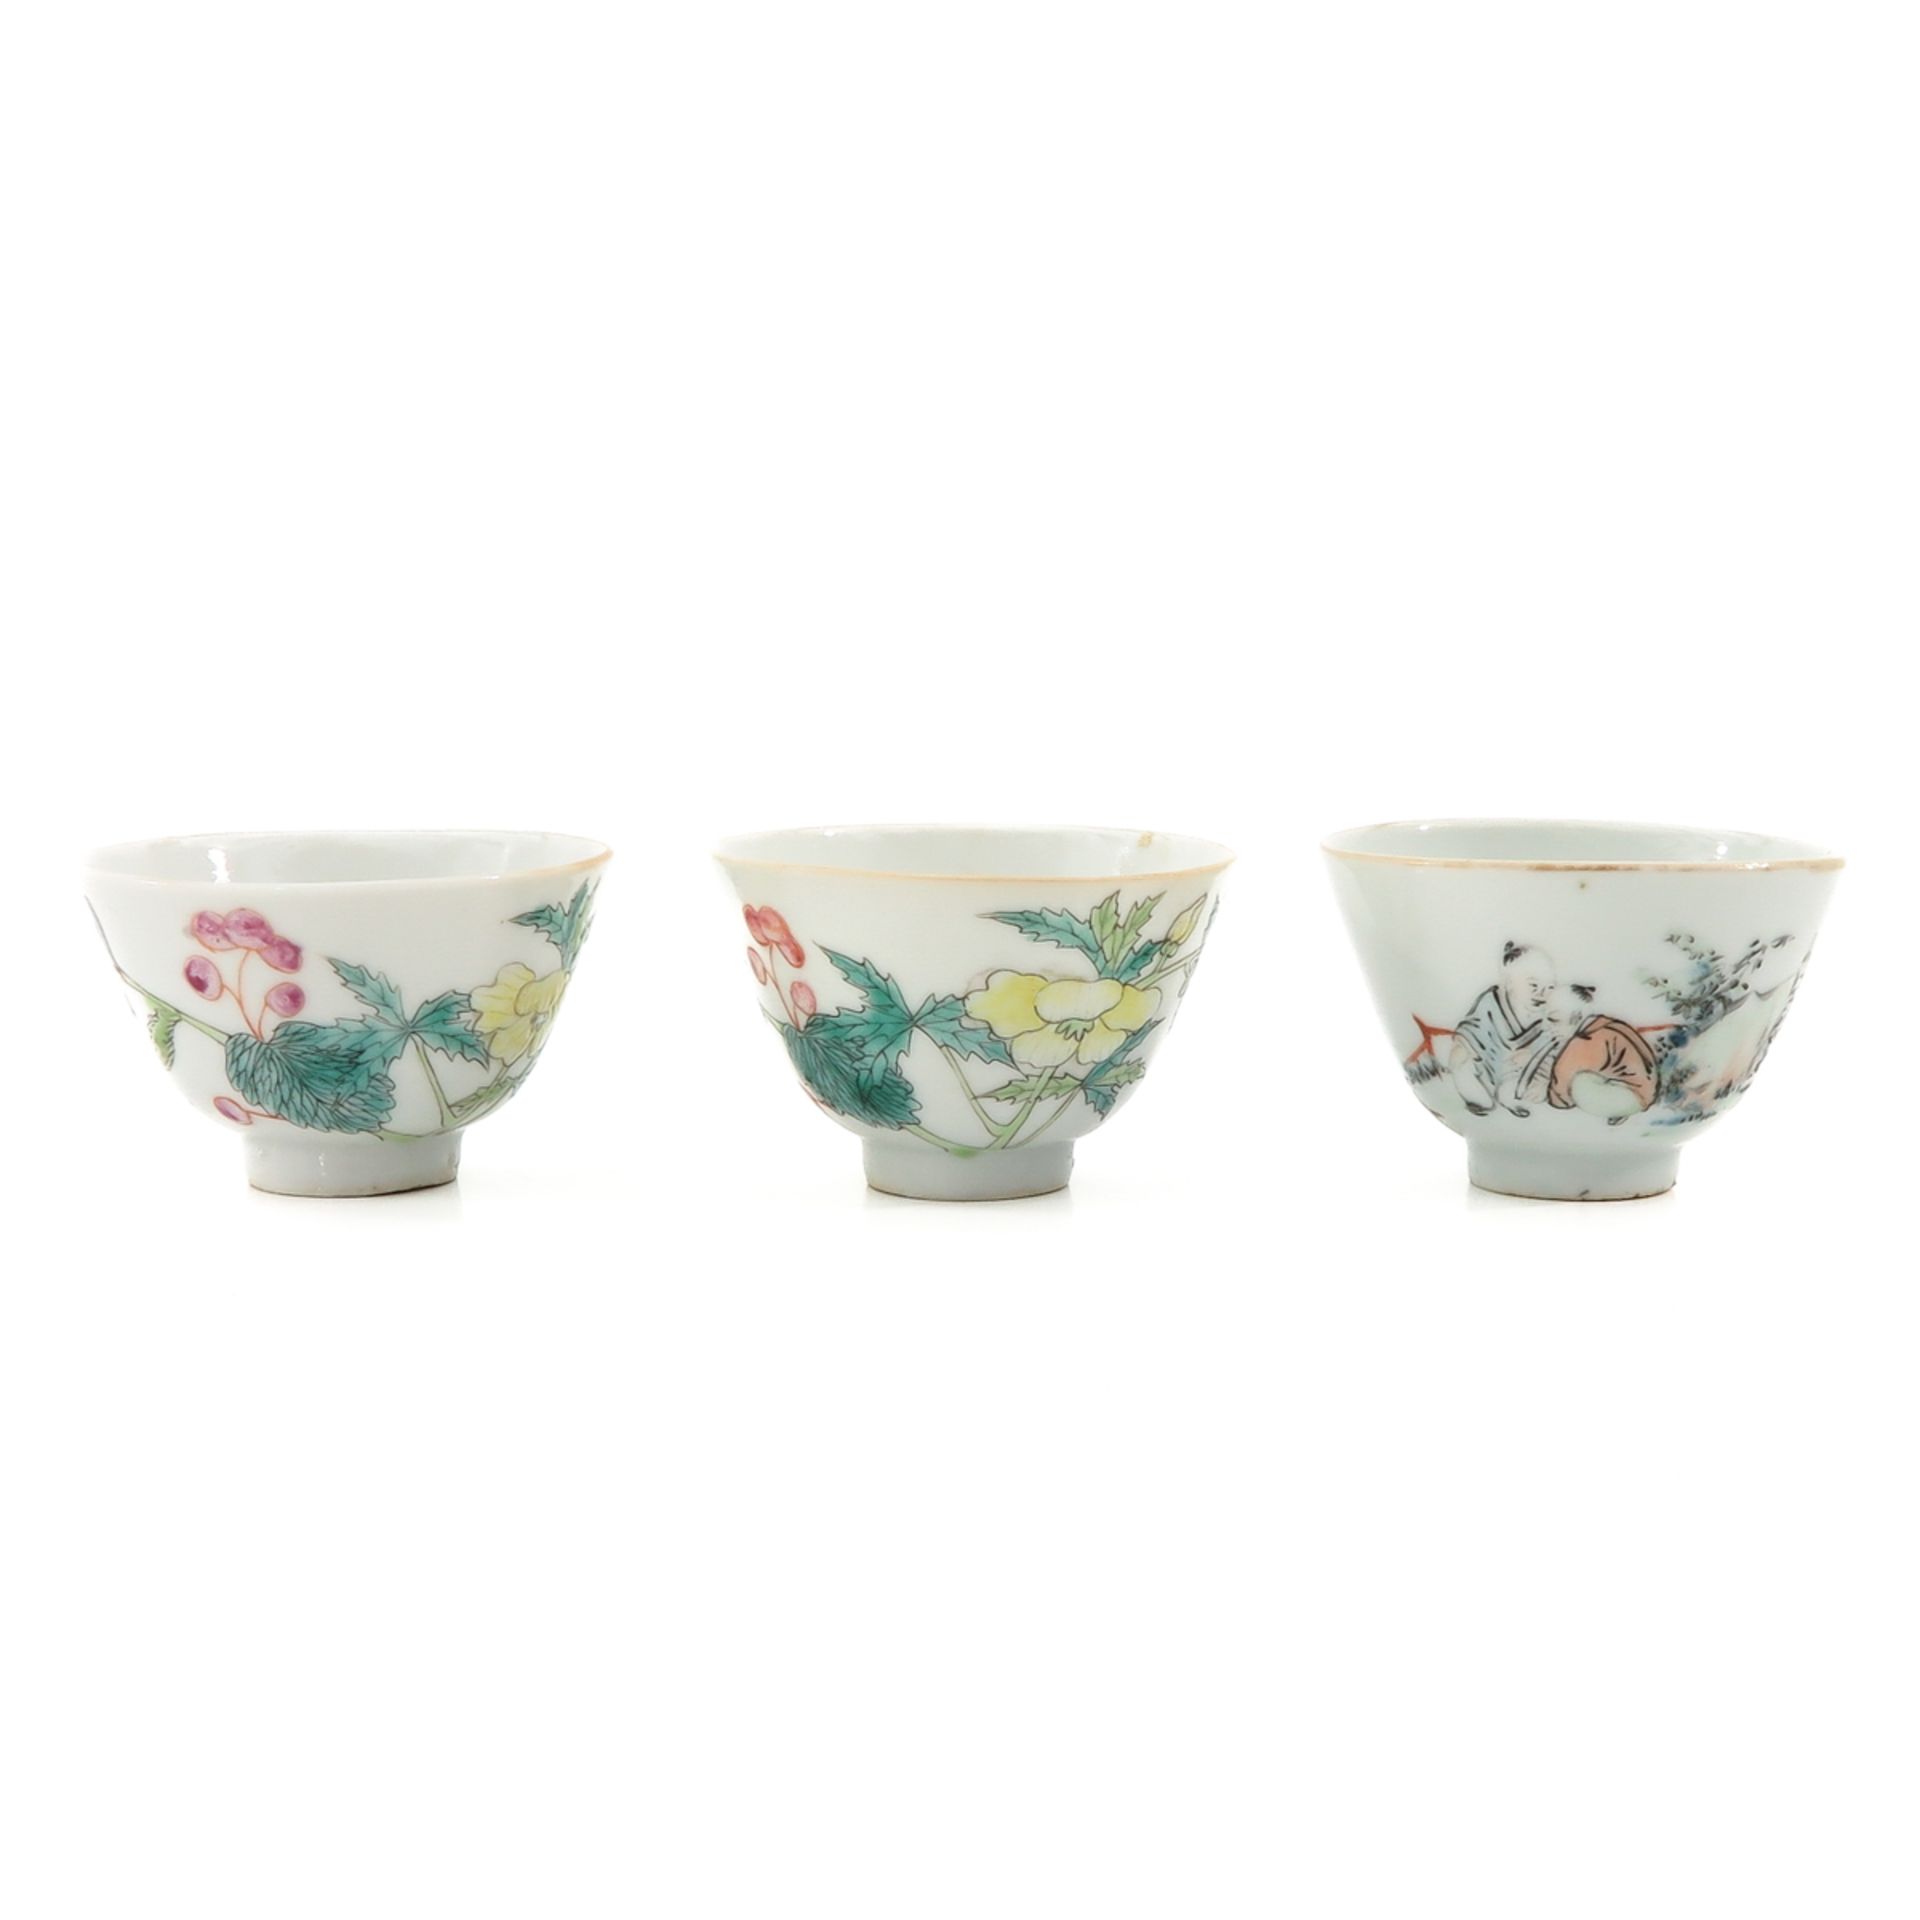 A Collection of 3 Famille Rose Cups